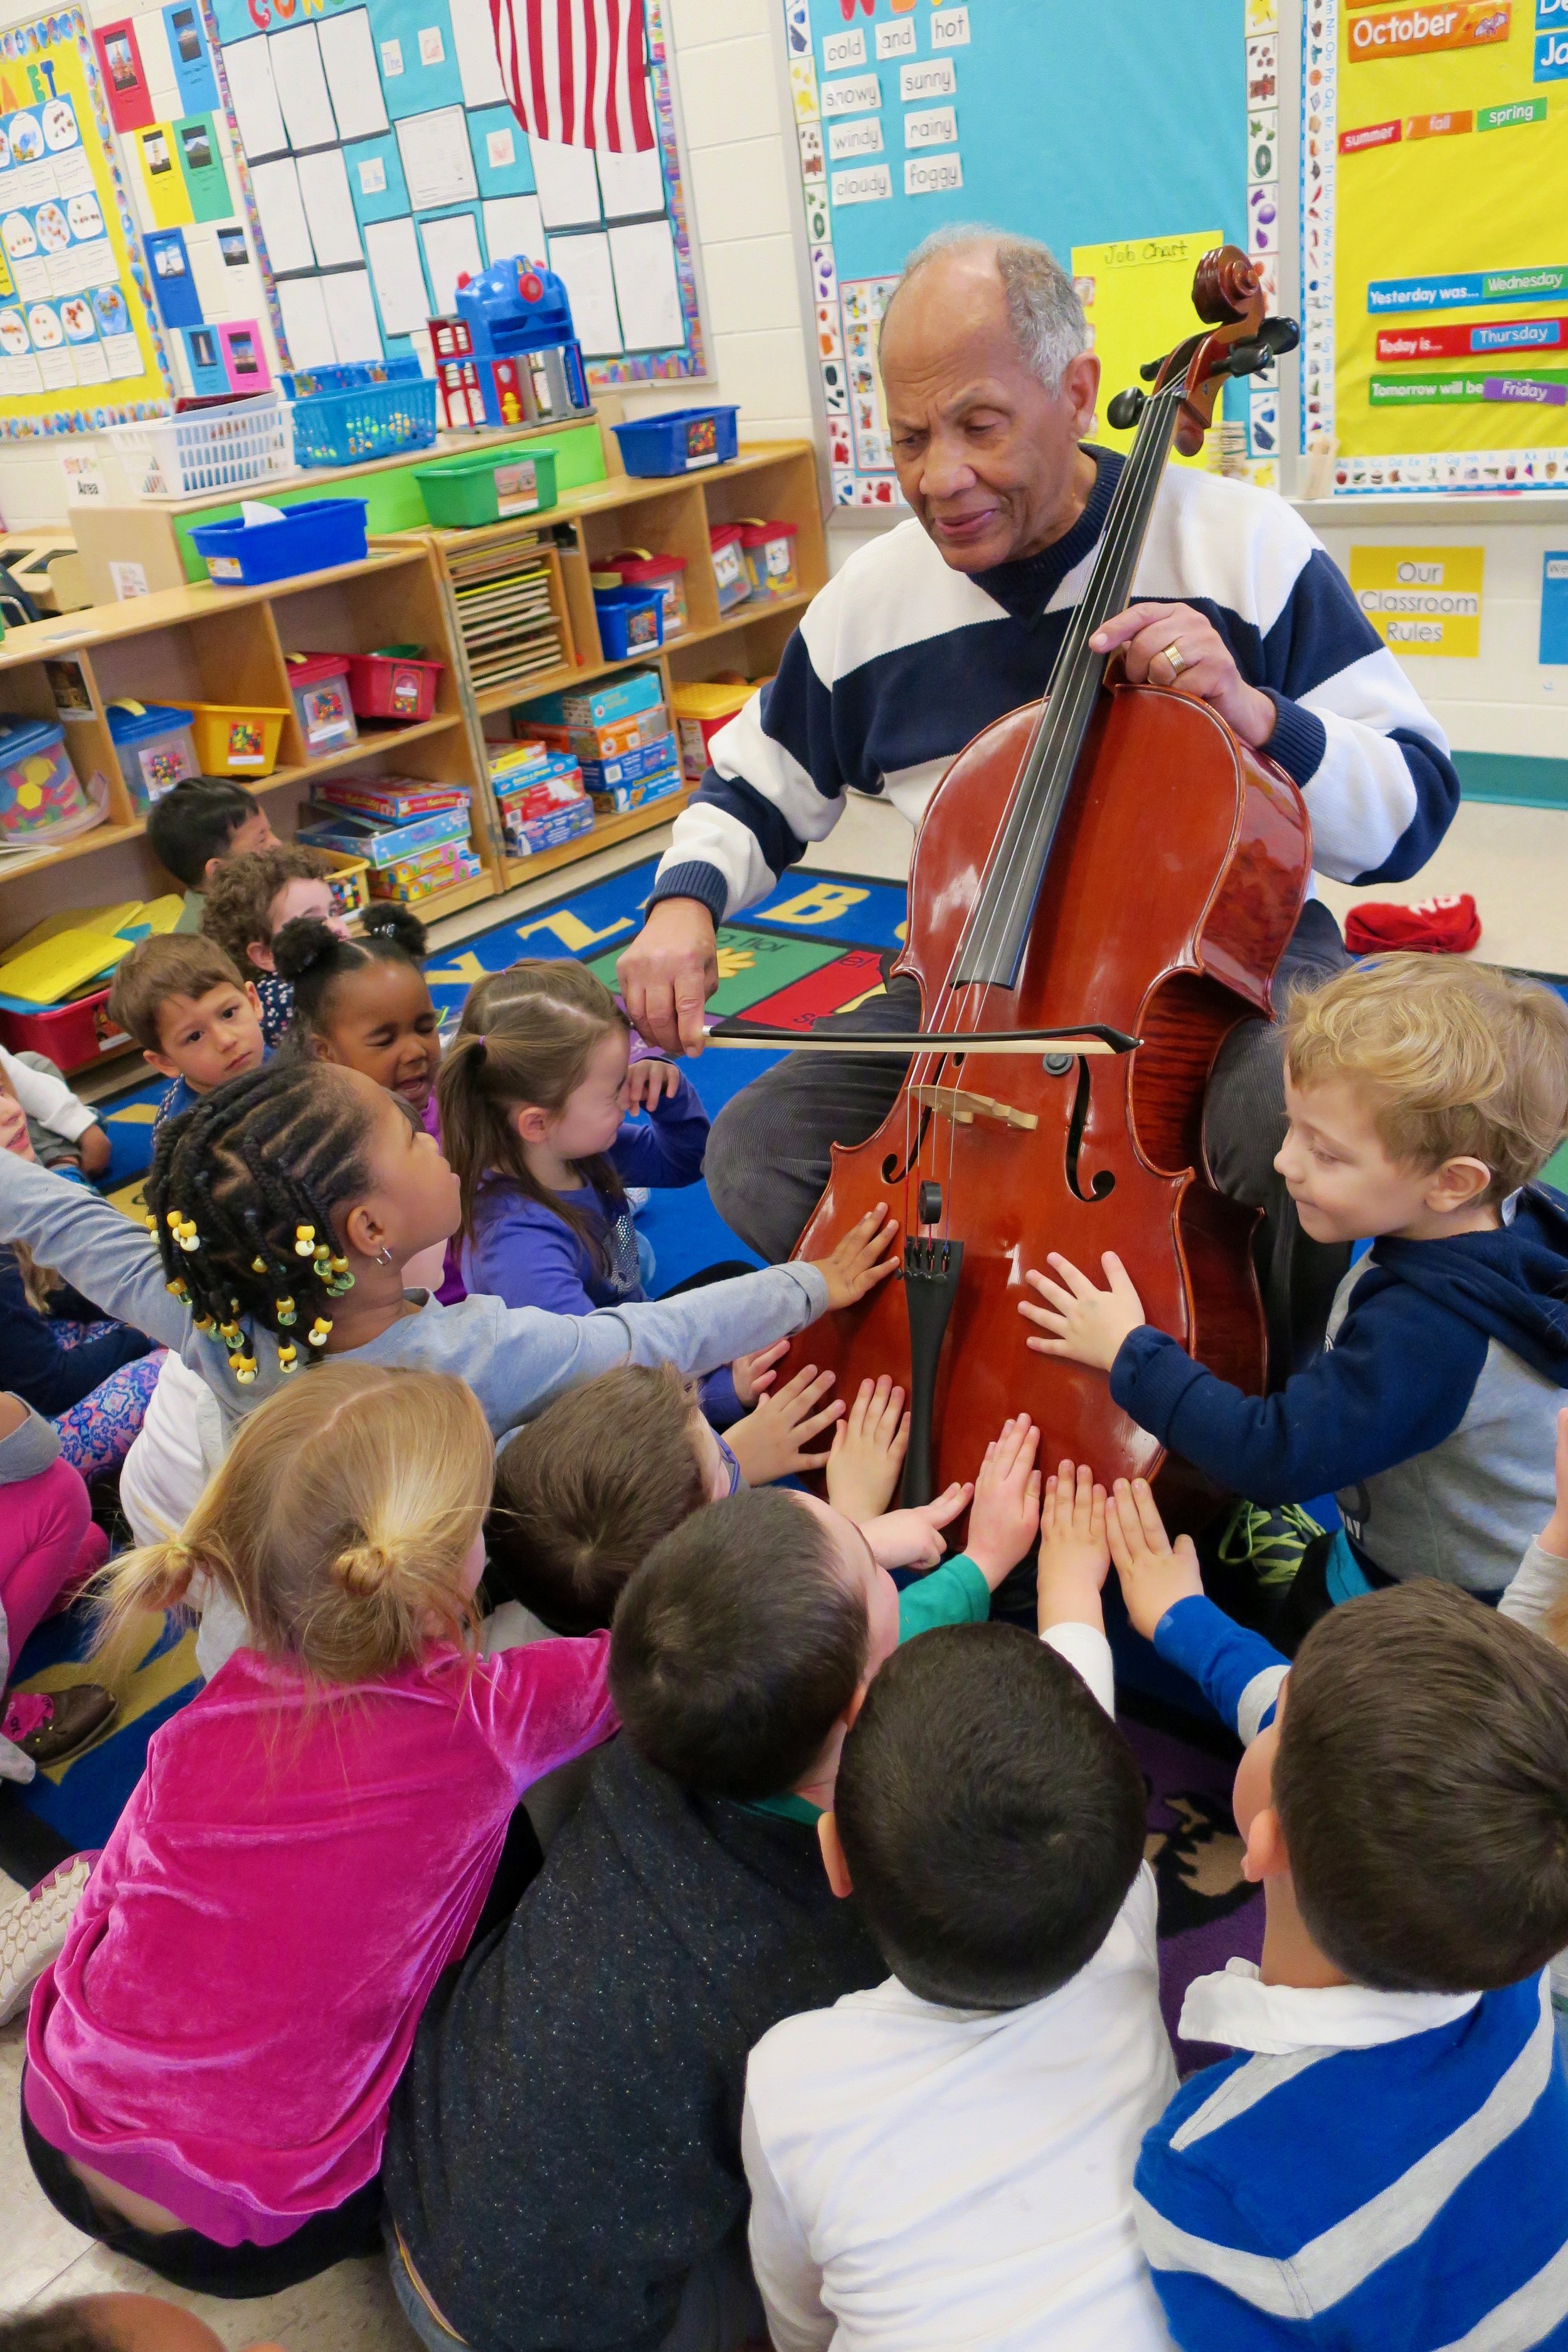 DC Strings Member Ray Pitts shares a moment with local elementary school children - sharing the joys of music and introducing them to the cello!